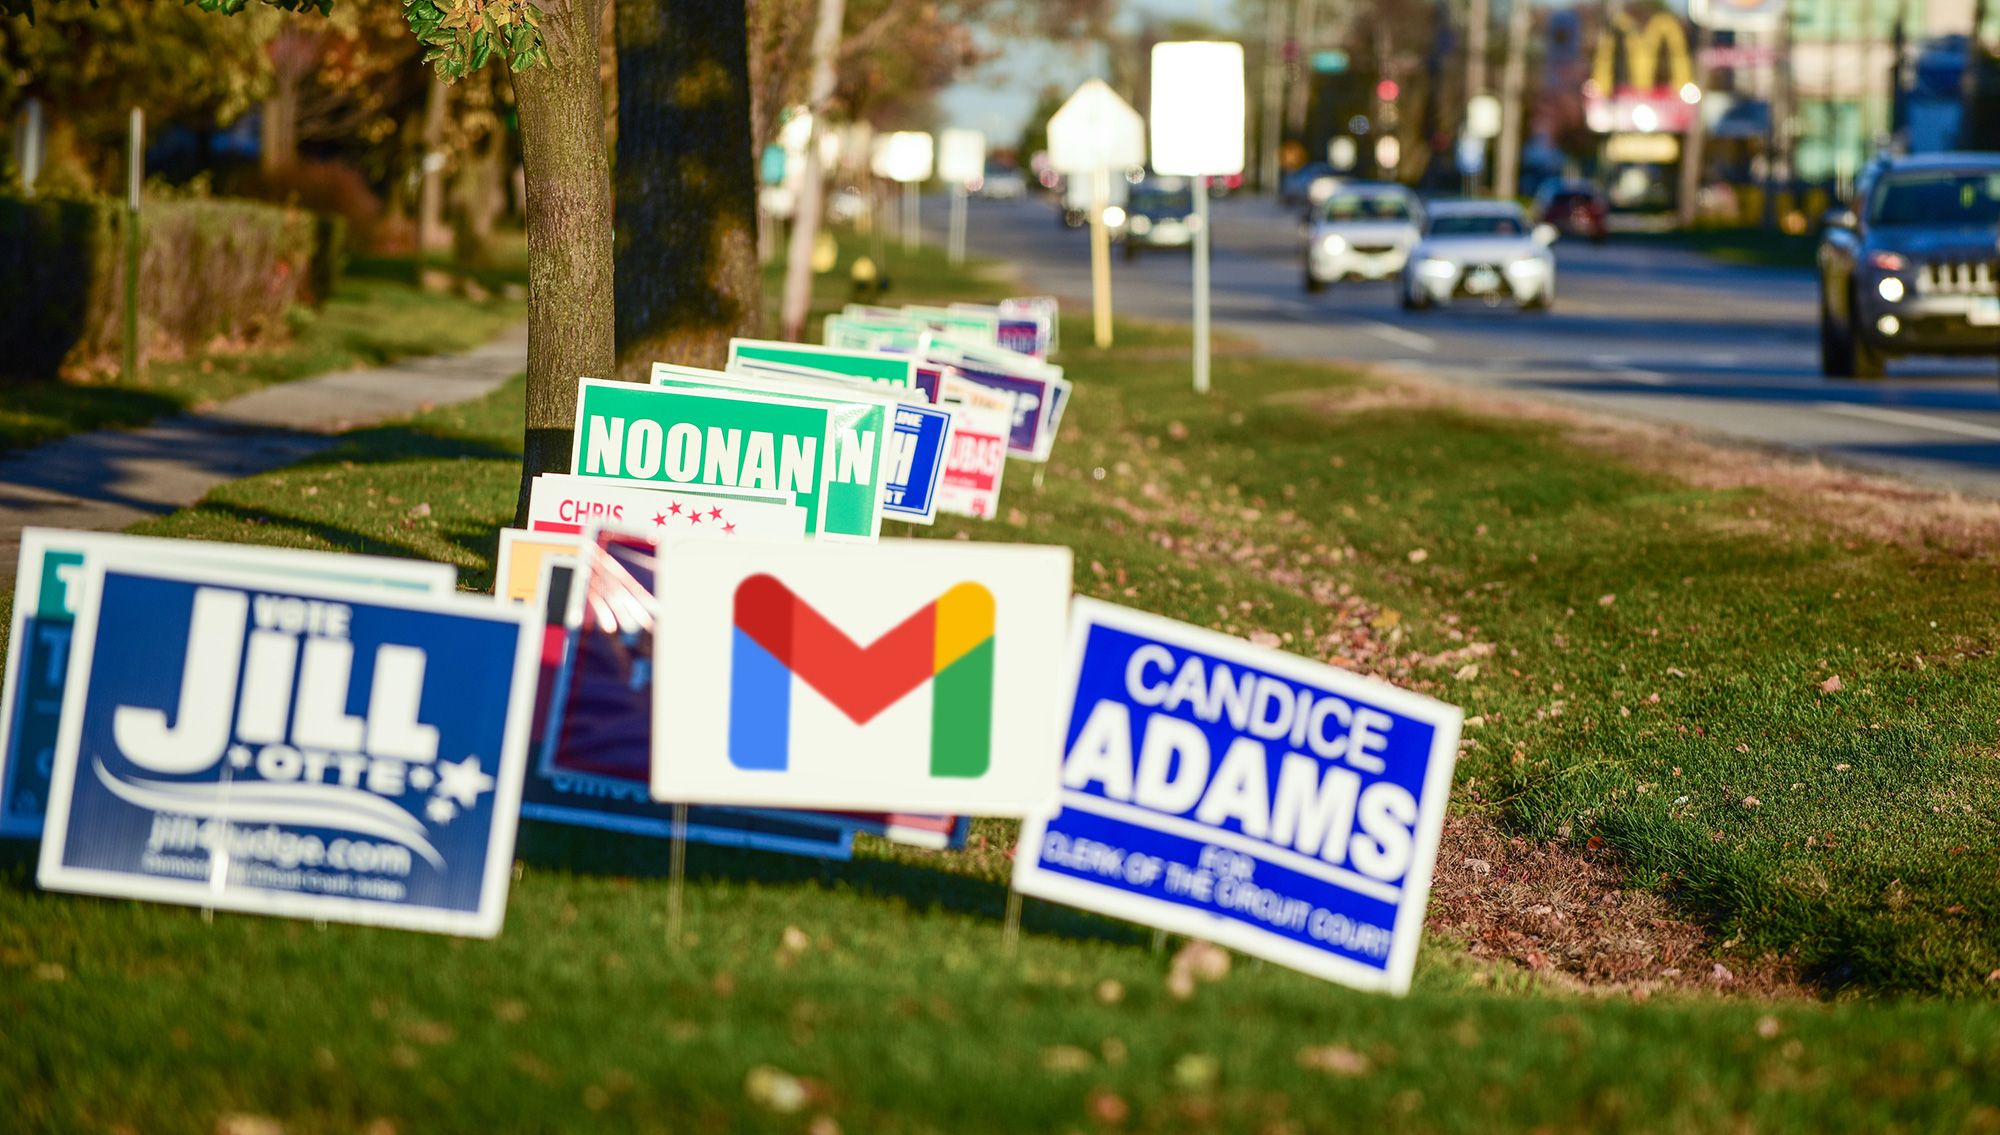 A grassy area next to a road is filled with political campaign signs, with the Google Gmail logo in the middle